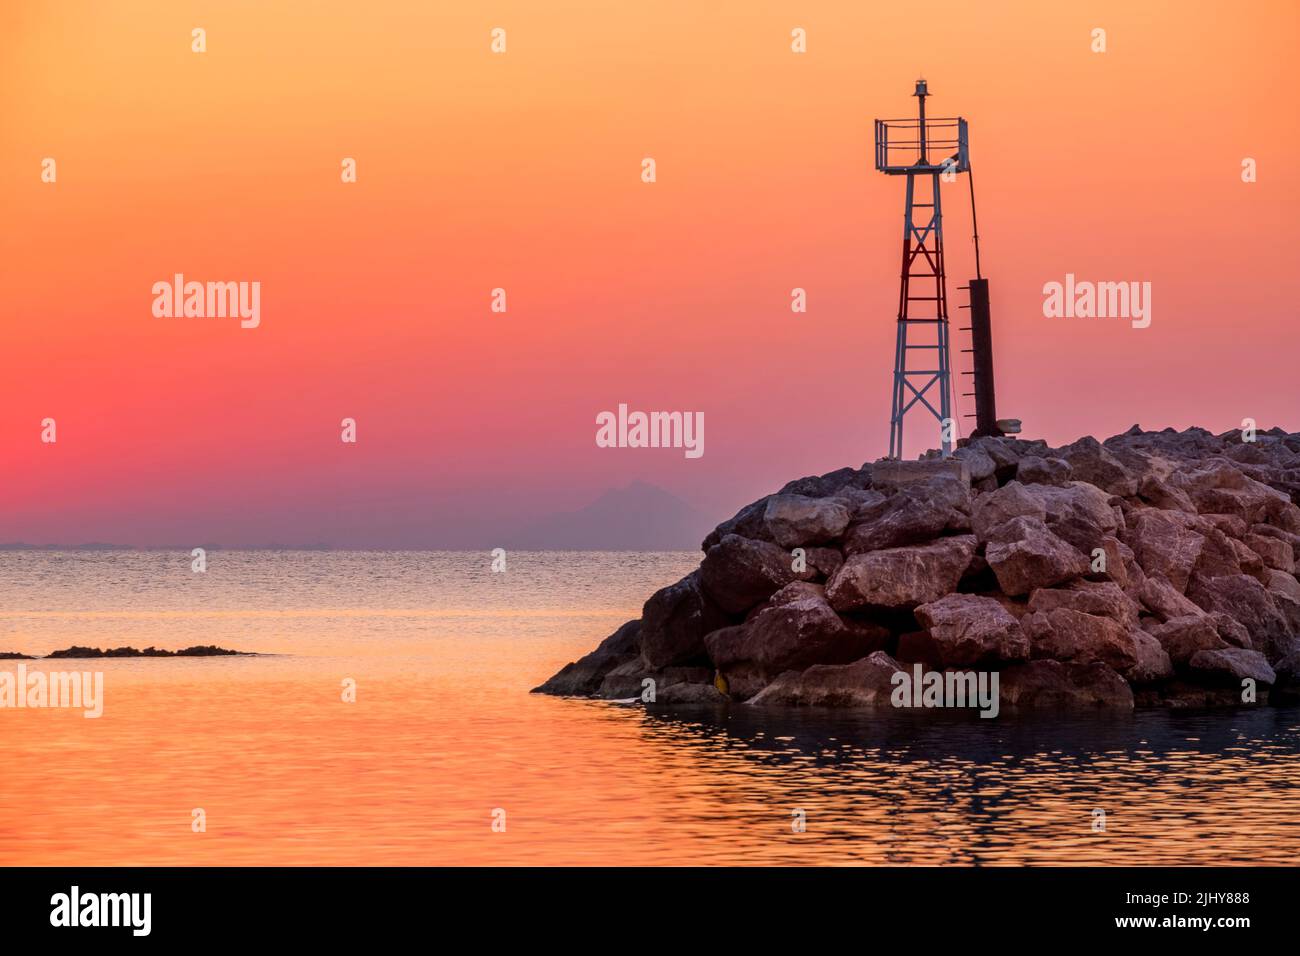 Sunrise seascape of a lighthouse at the foreground Stock Photo